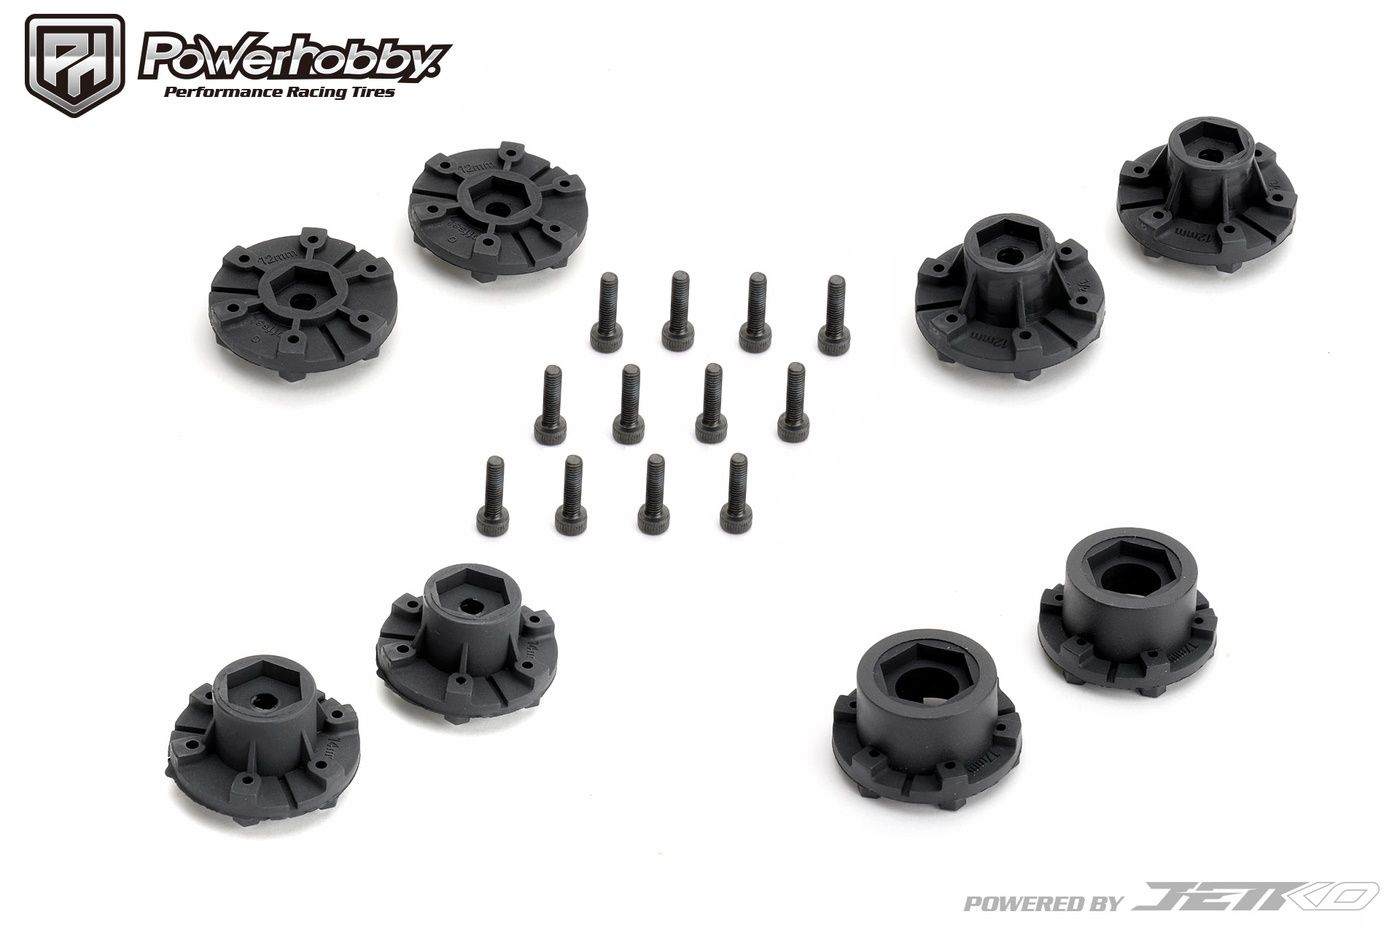 Powerhobby Slayer SC Belted Tires (2) with Removable Hex Wheels - PowerHobby